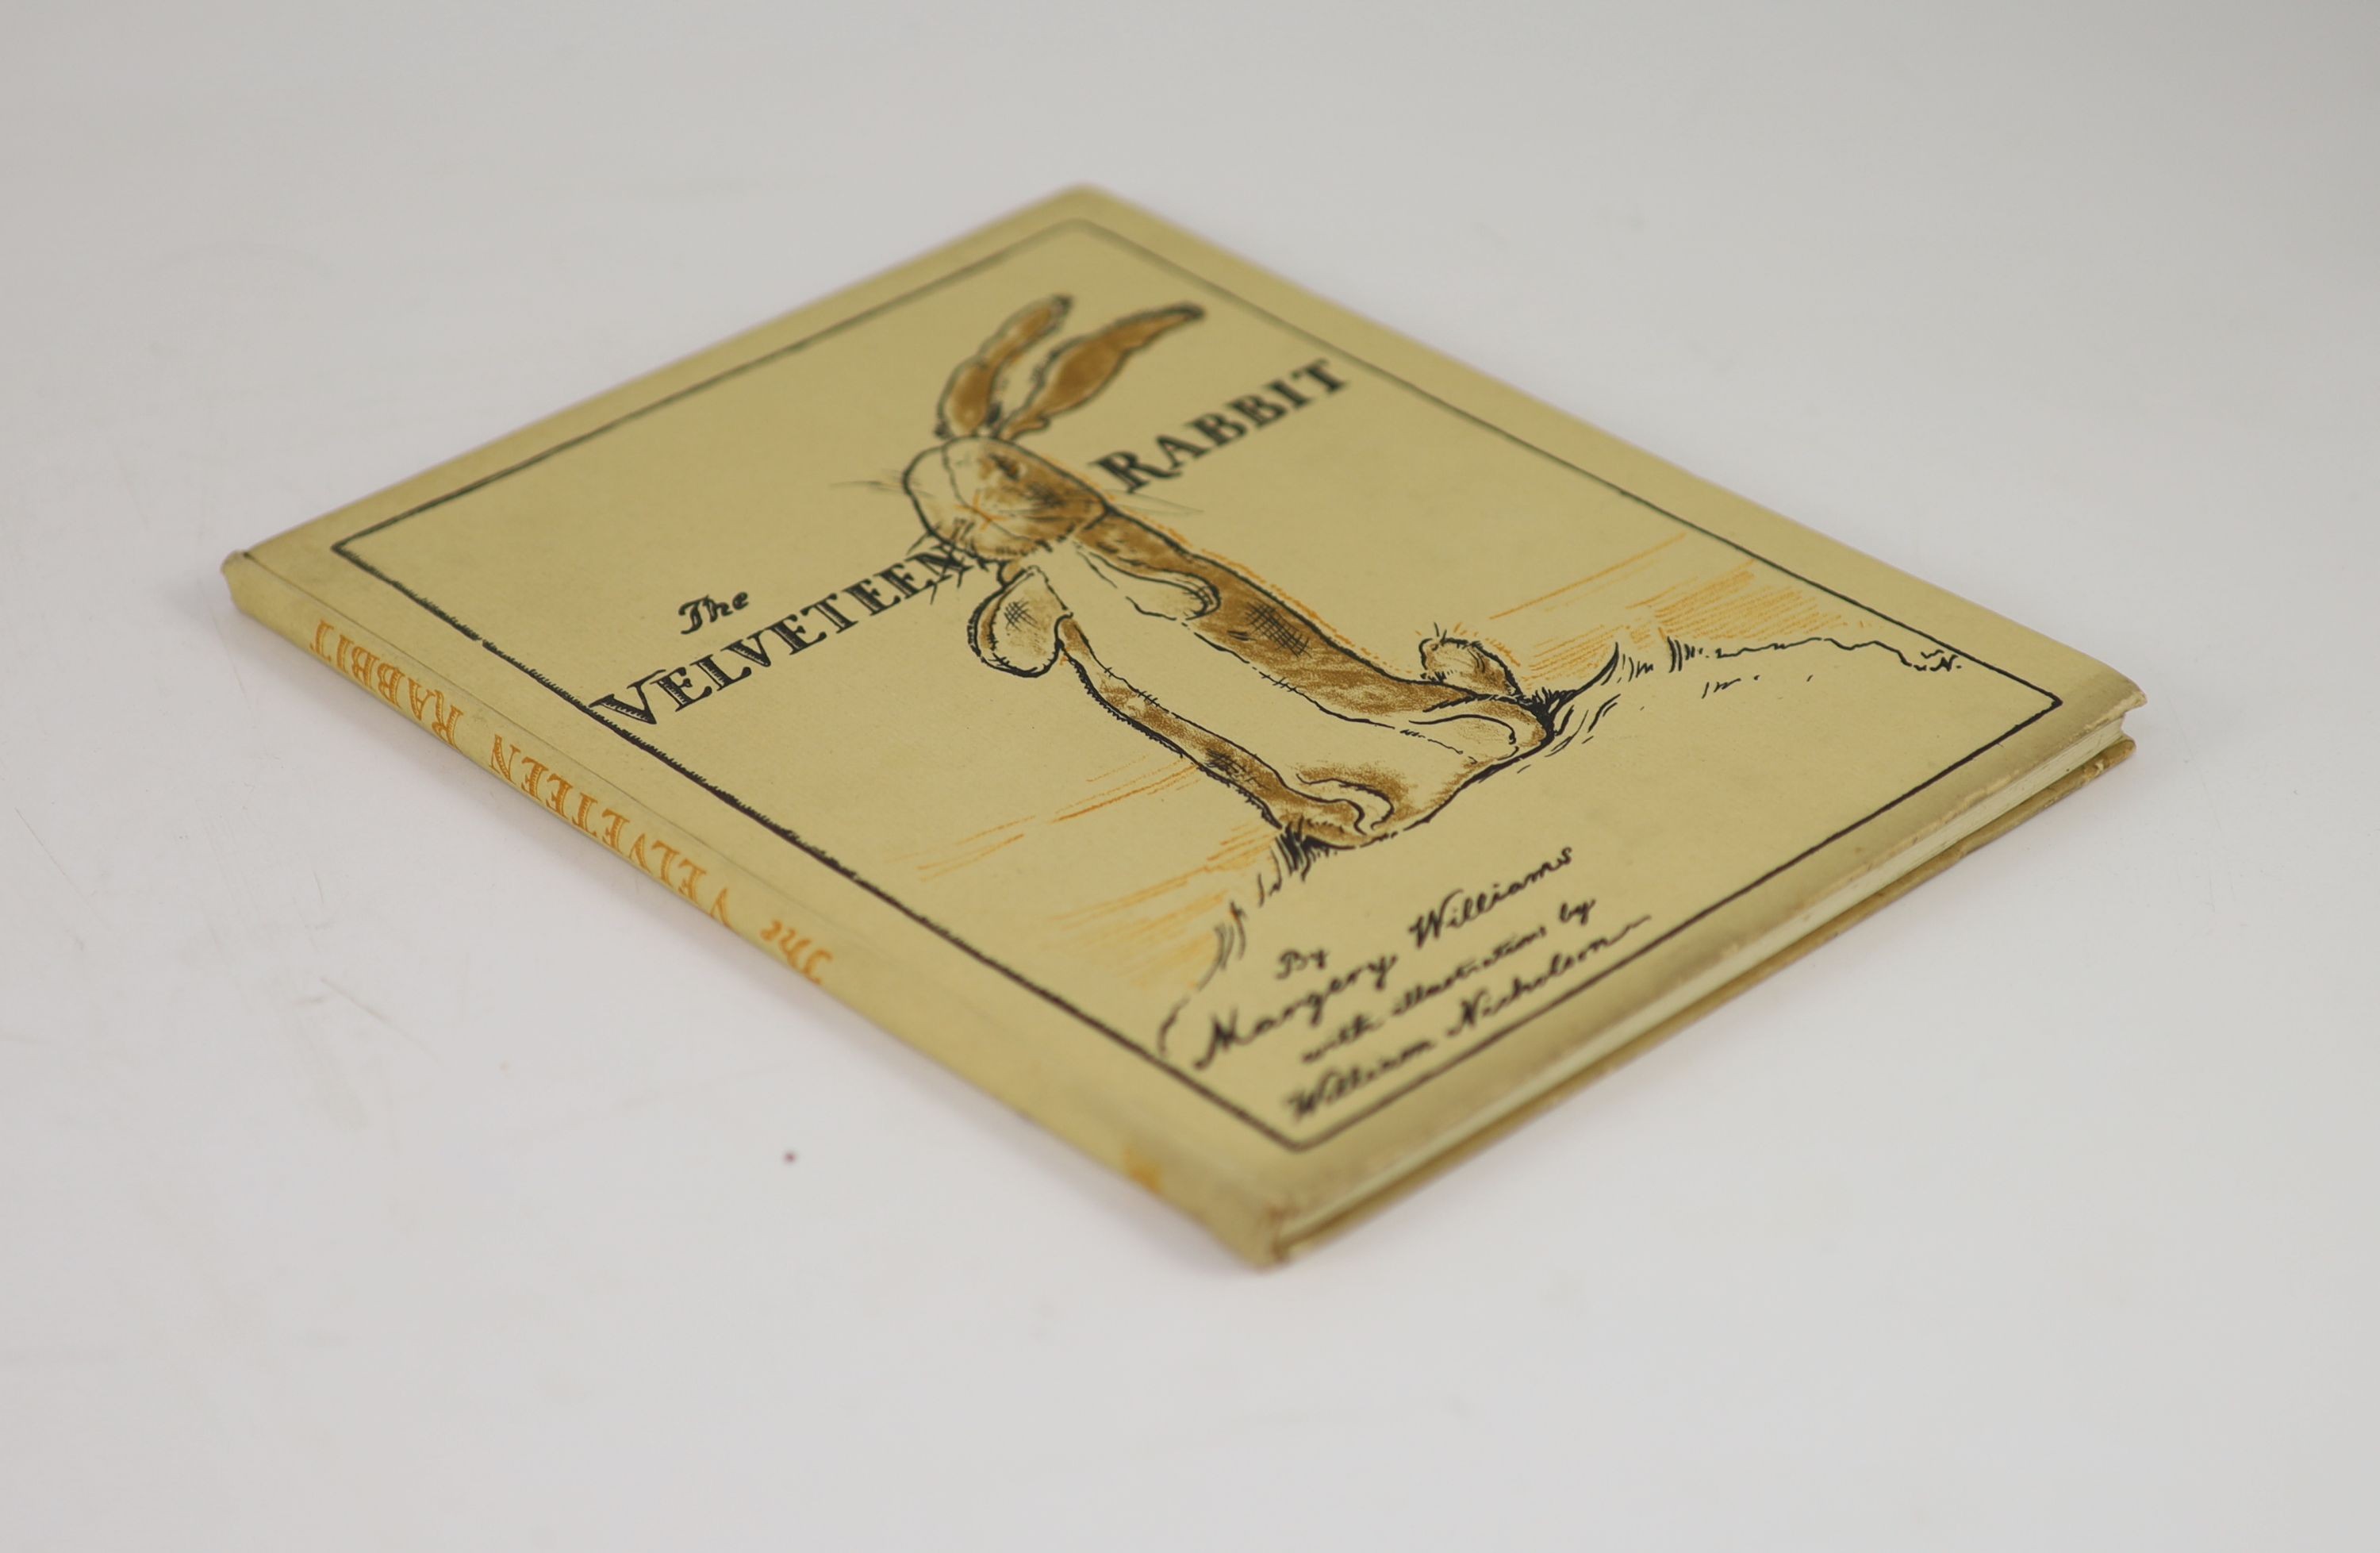 Bianco, Margery Williams - The Velveteen Rabbit or How Toys Become Real, 1st edition, illustrated by William Nicholson, original pictorial boards, with d/j, with 7 colour plates, Heinemann, London, 1922